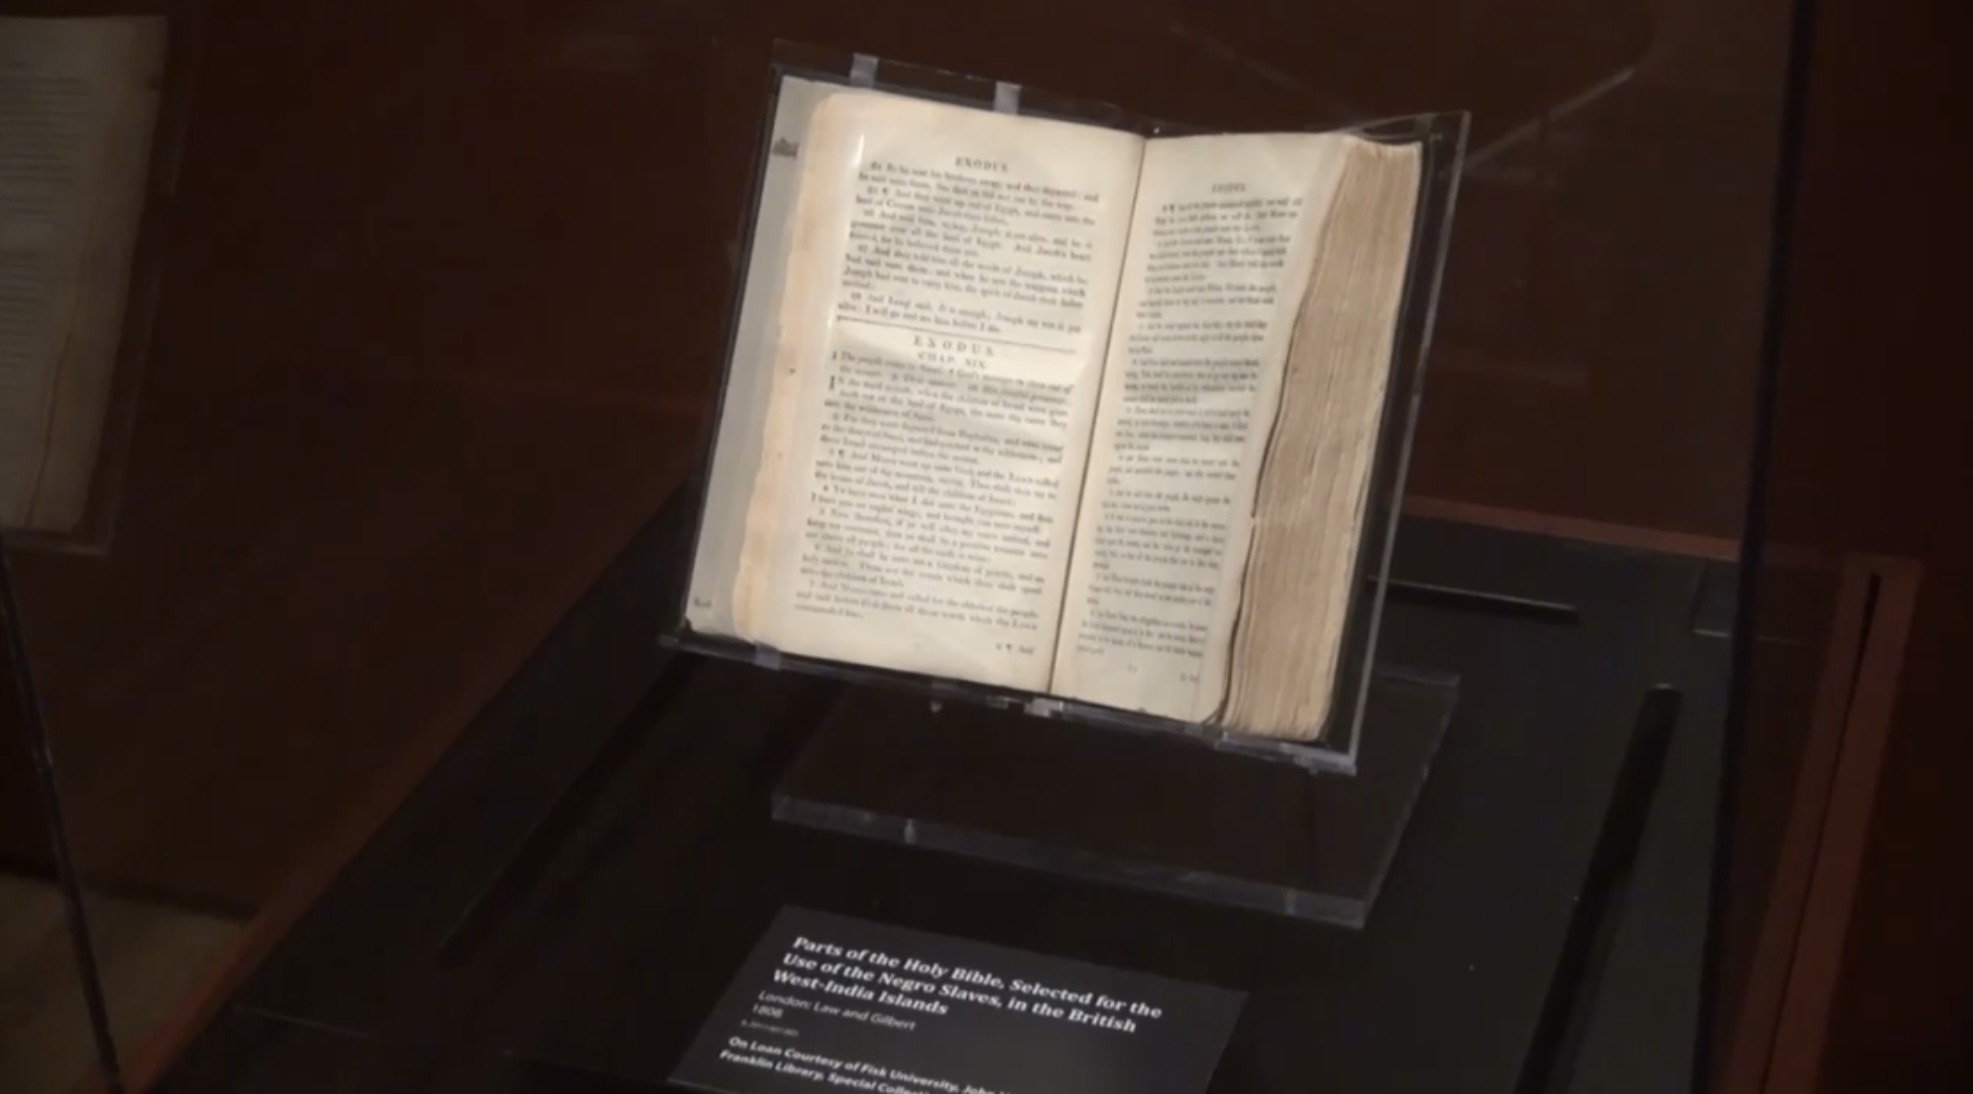 Photograph of Slave Bible showing the edited Exodus passage